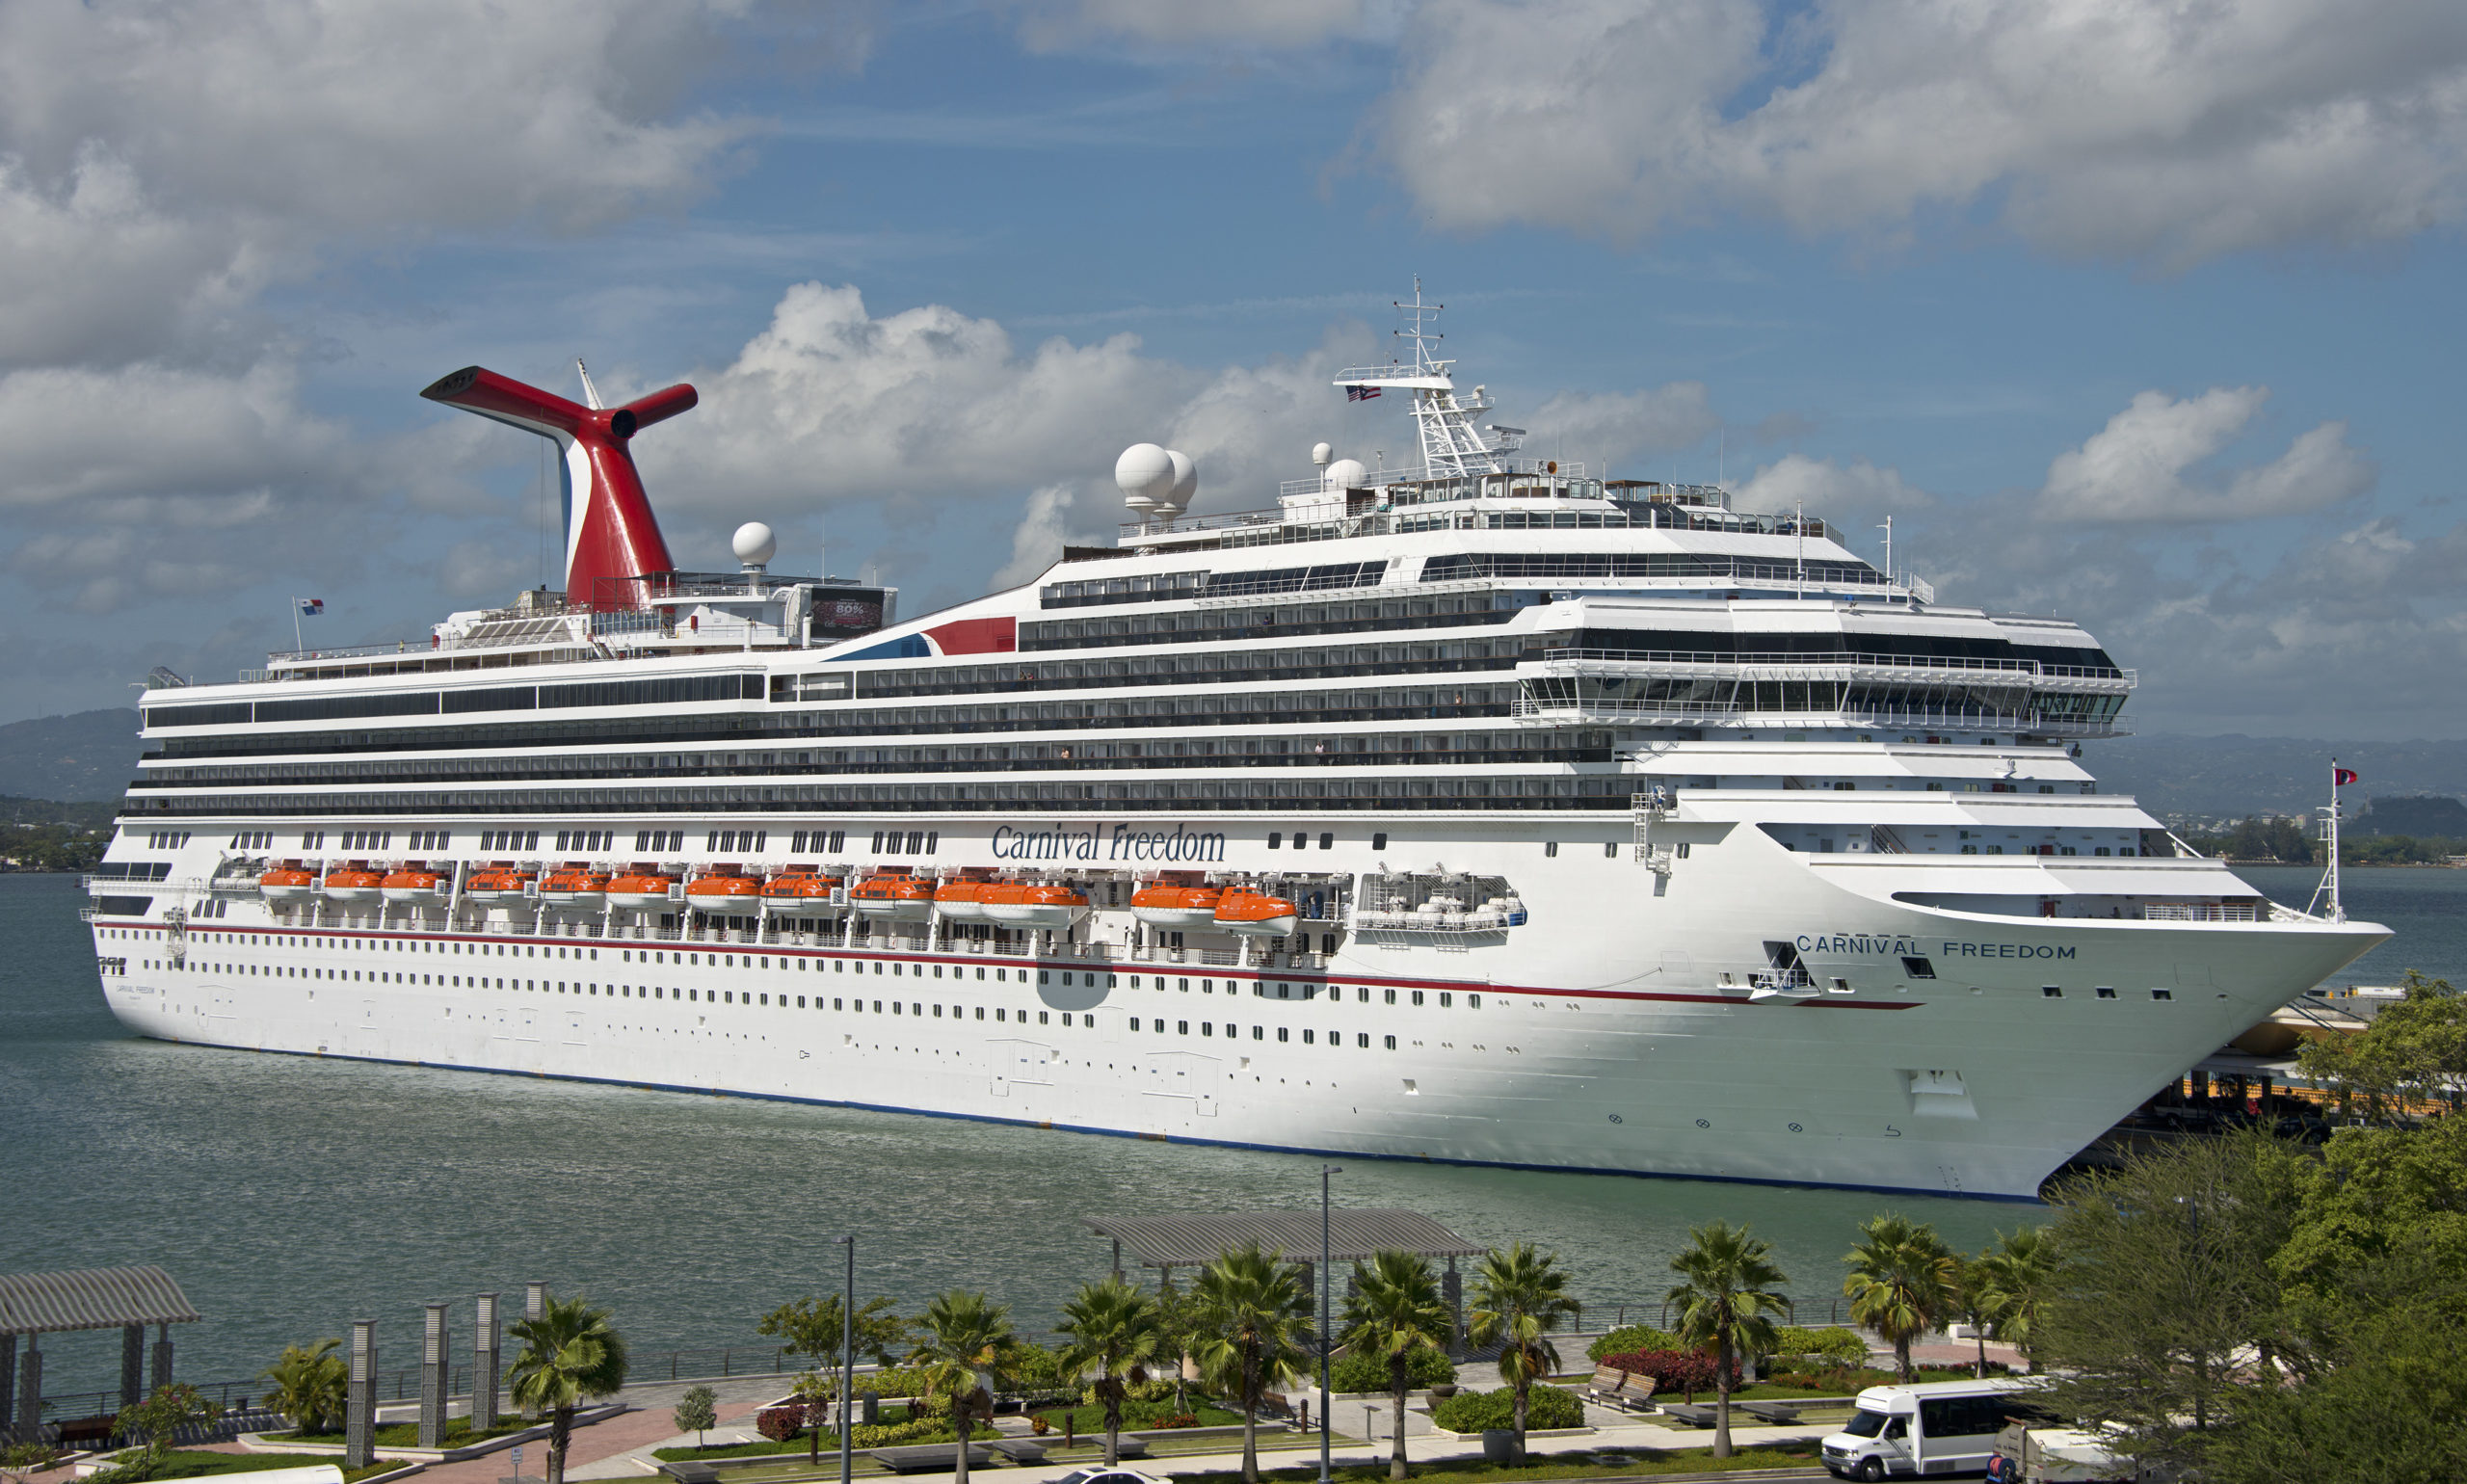 katy-s-gone-cruising-carnival-freedom-offers-the-latest-in-family-fun-and-sails-from-galveston